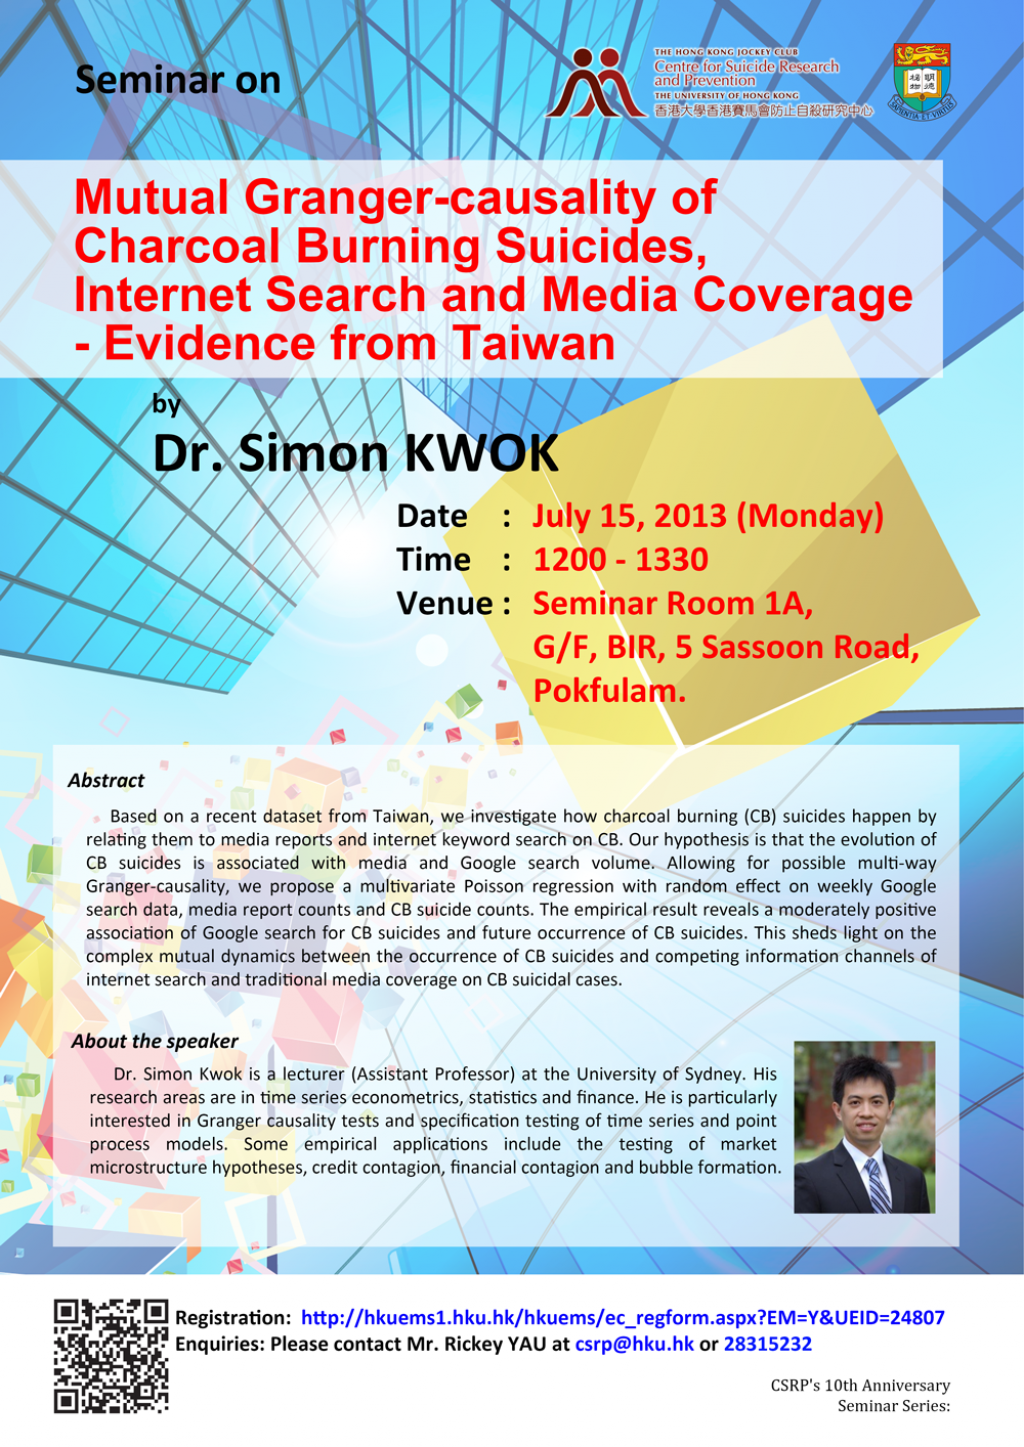 Seminar: Mutual Granger-causality of Charcoal Burning Suicides, Internet Search and Media Coverage - Evidence from Taiwan  